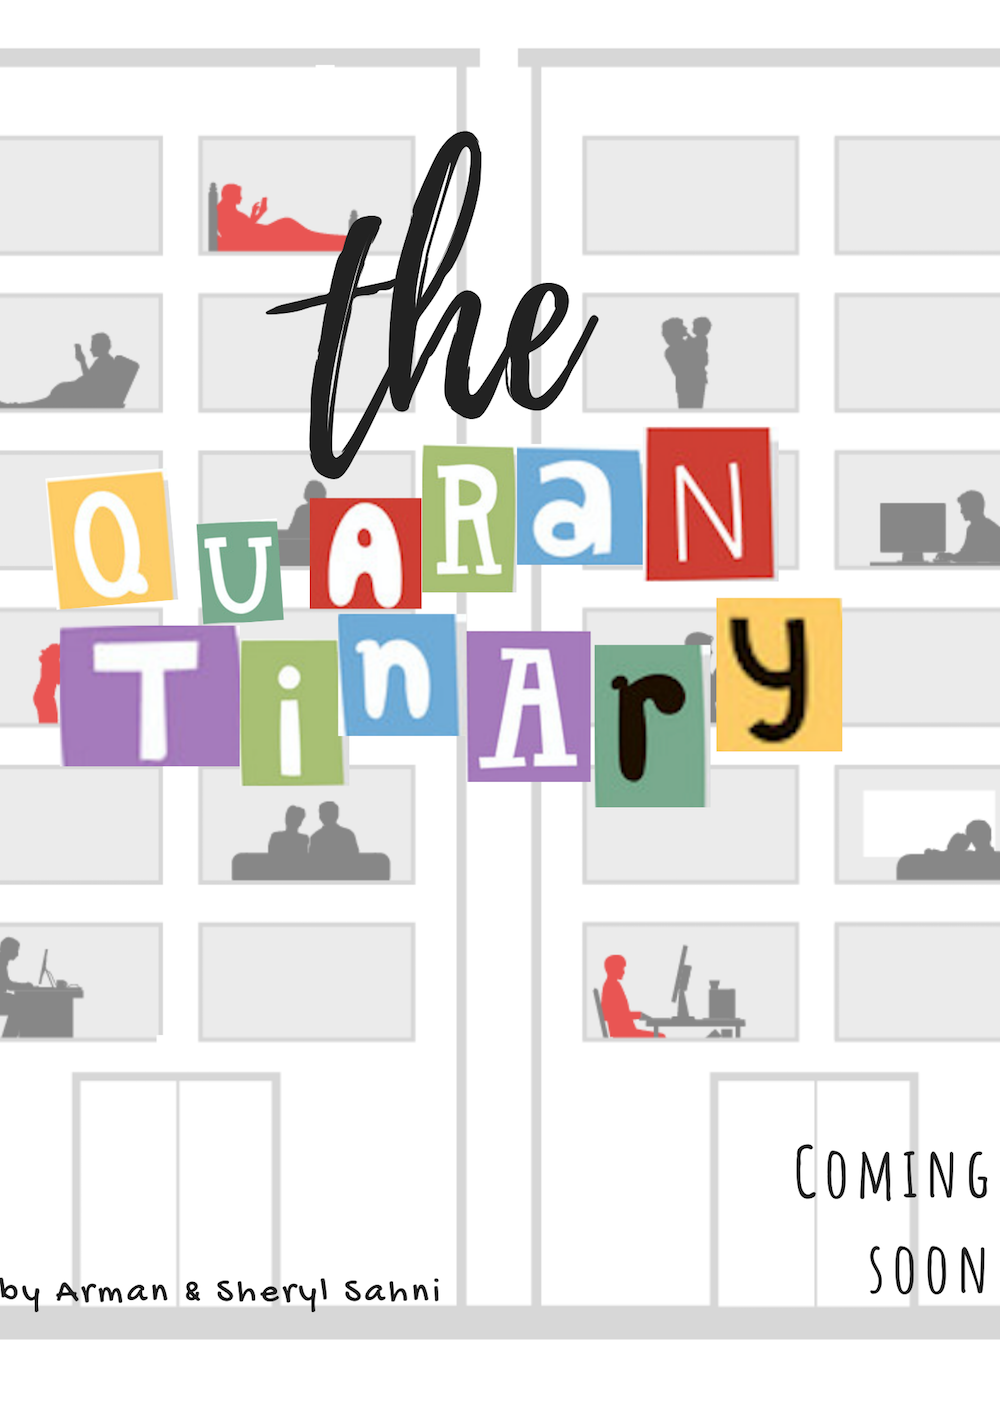 Grid of images in grey with "the quarantinary" written in colorful blacks